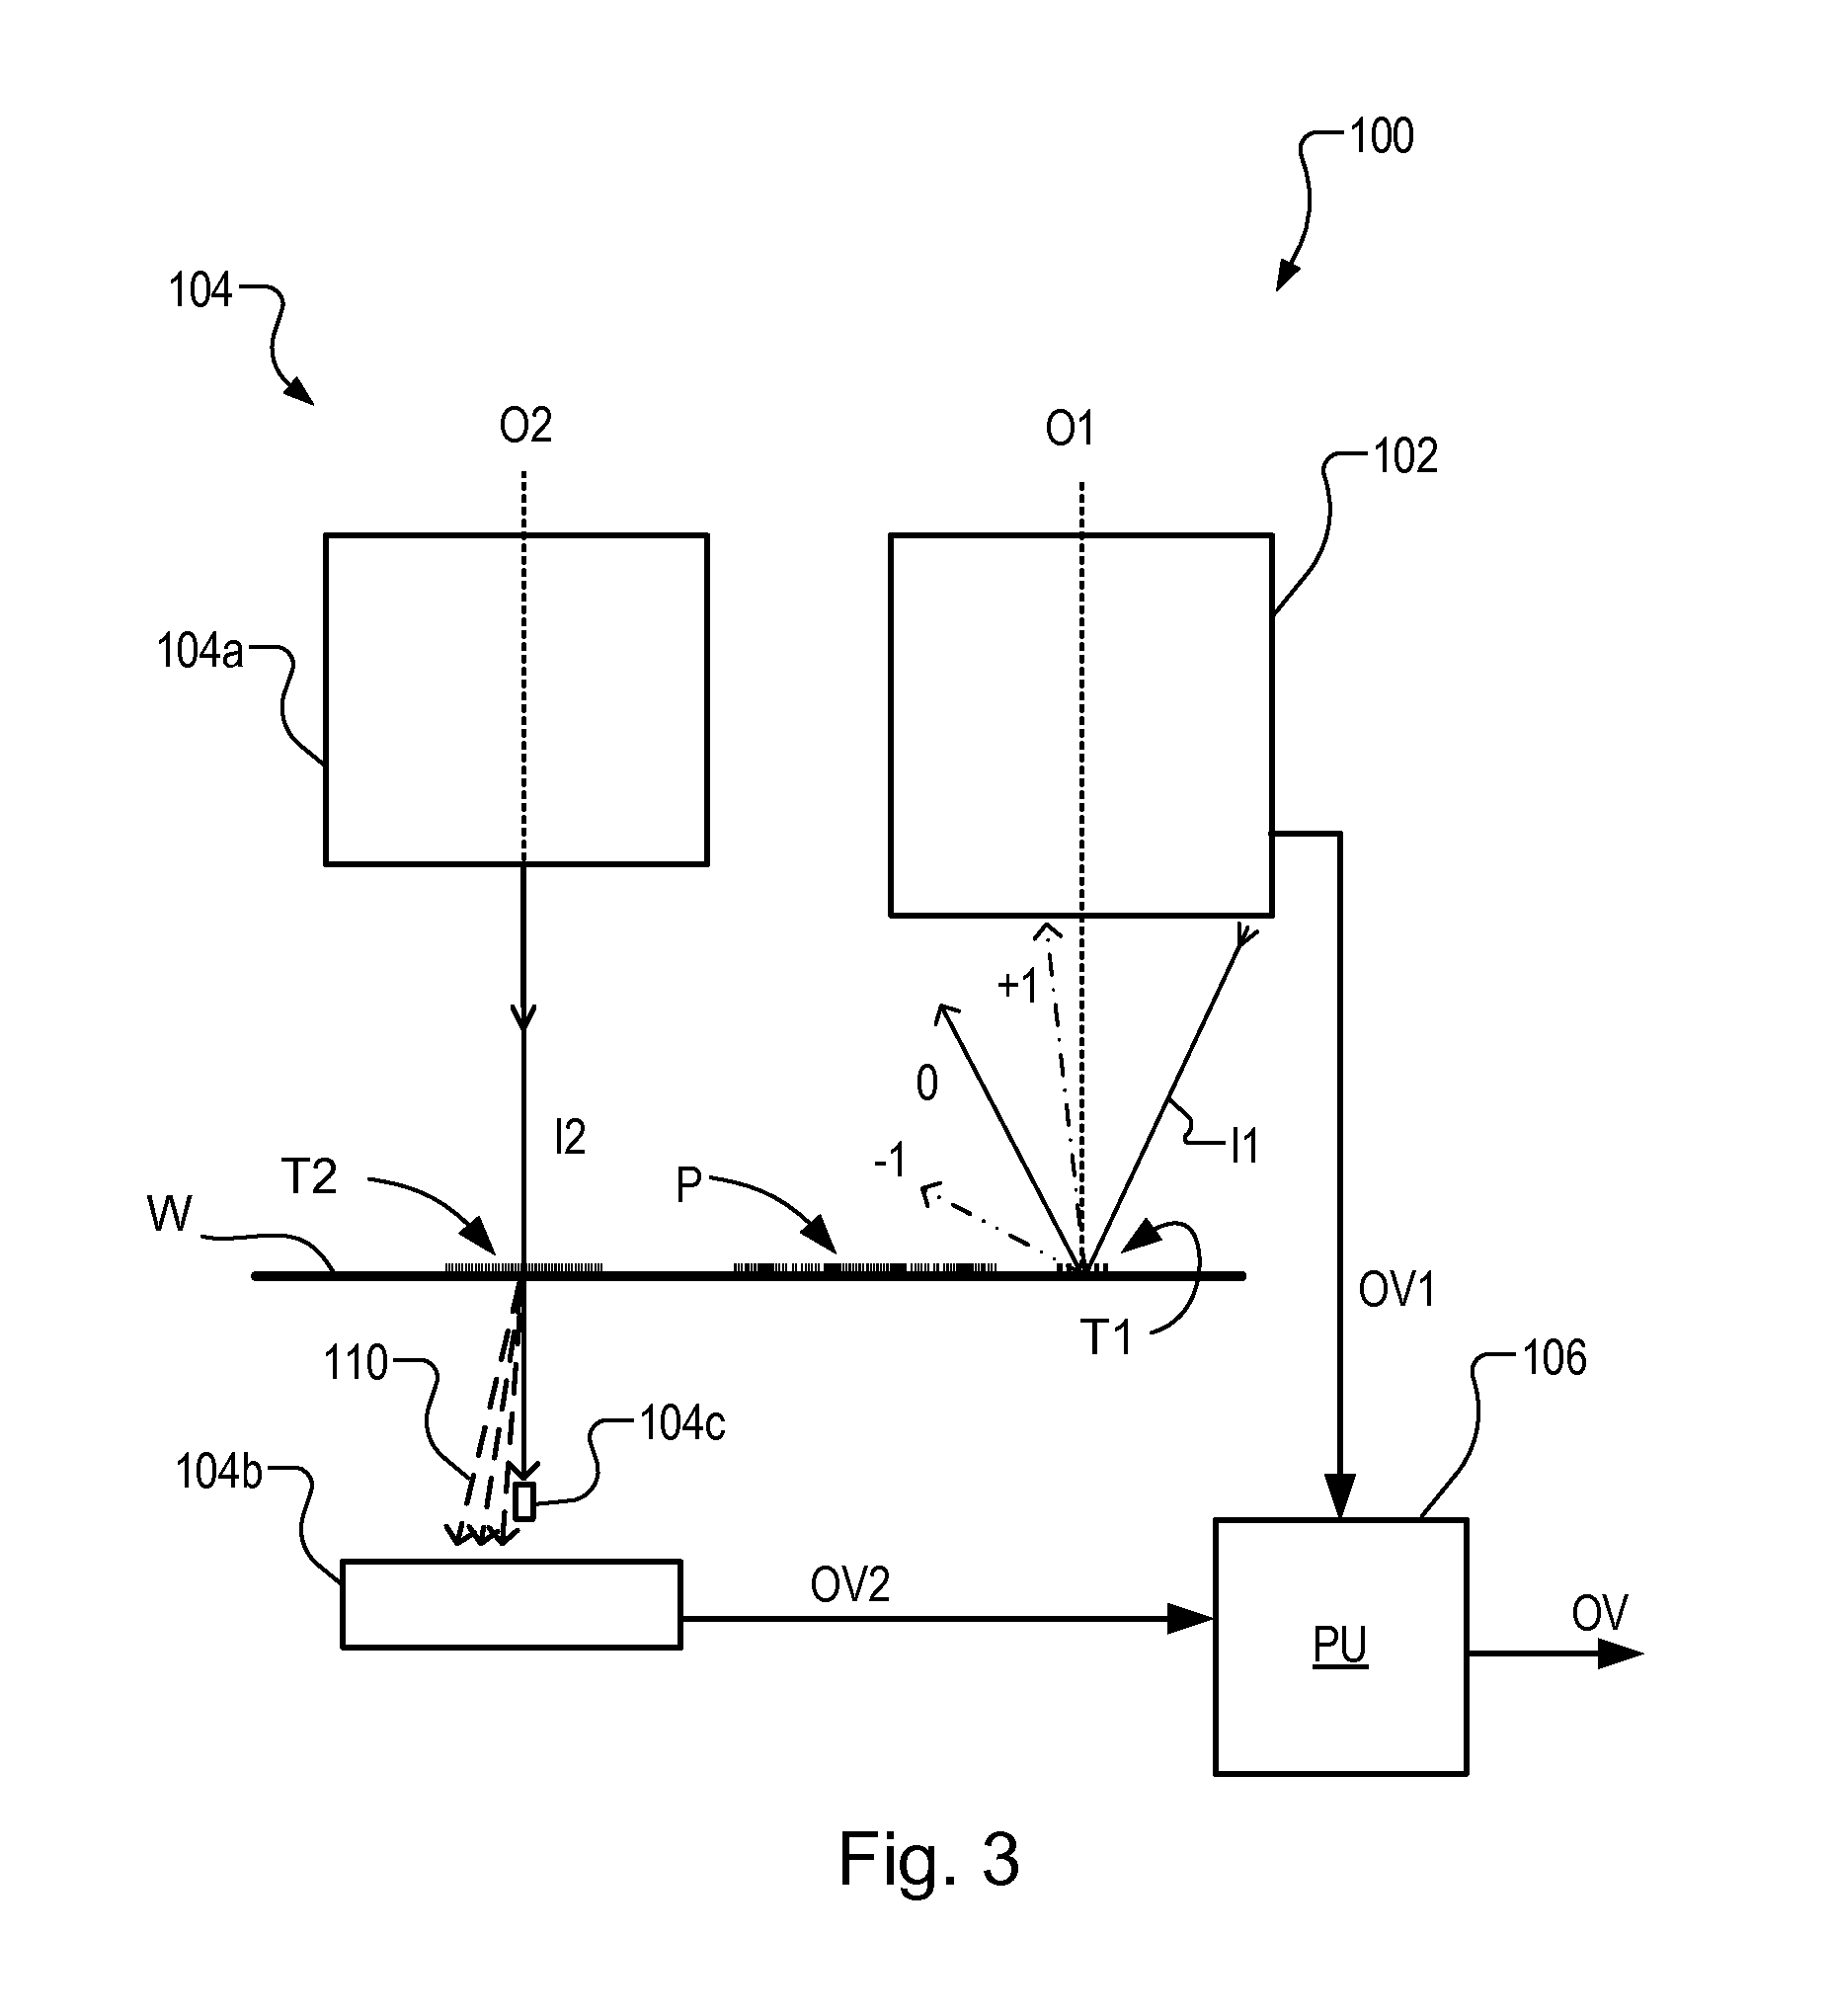 Substrate and Patterning Device for Use in Metrology, Metrology Method and Device Manufacturing Method